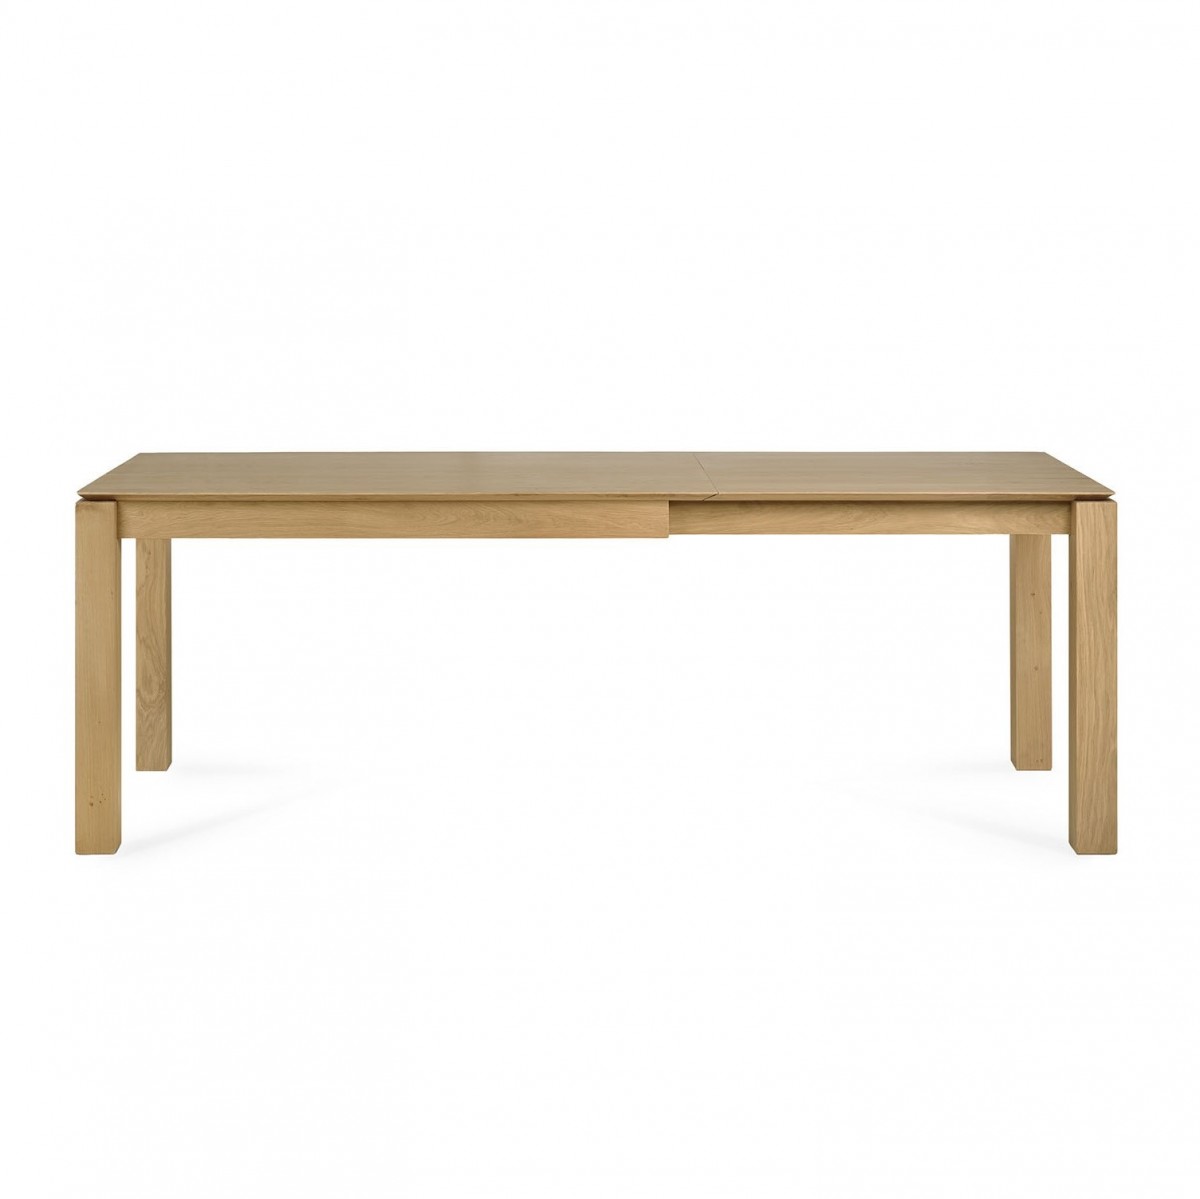 Slice Extendable Dining Table - Legs 8 x 8 cm | Highlight image